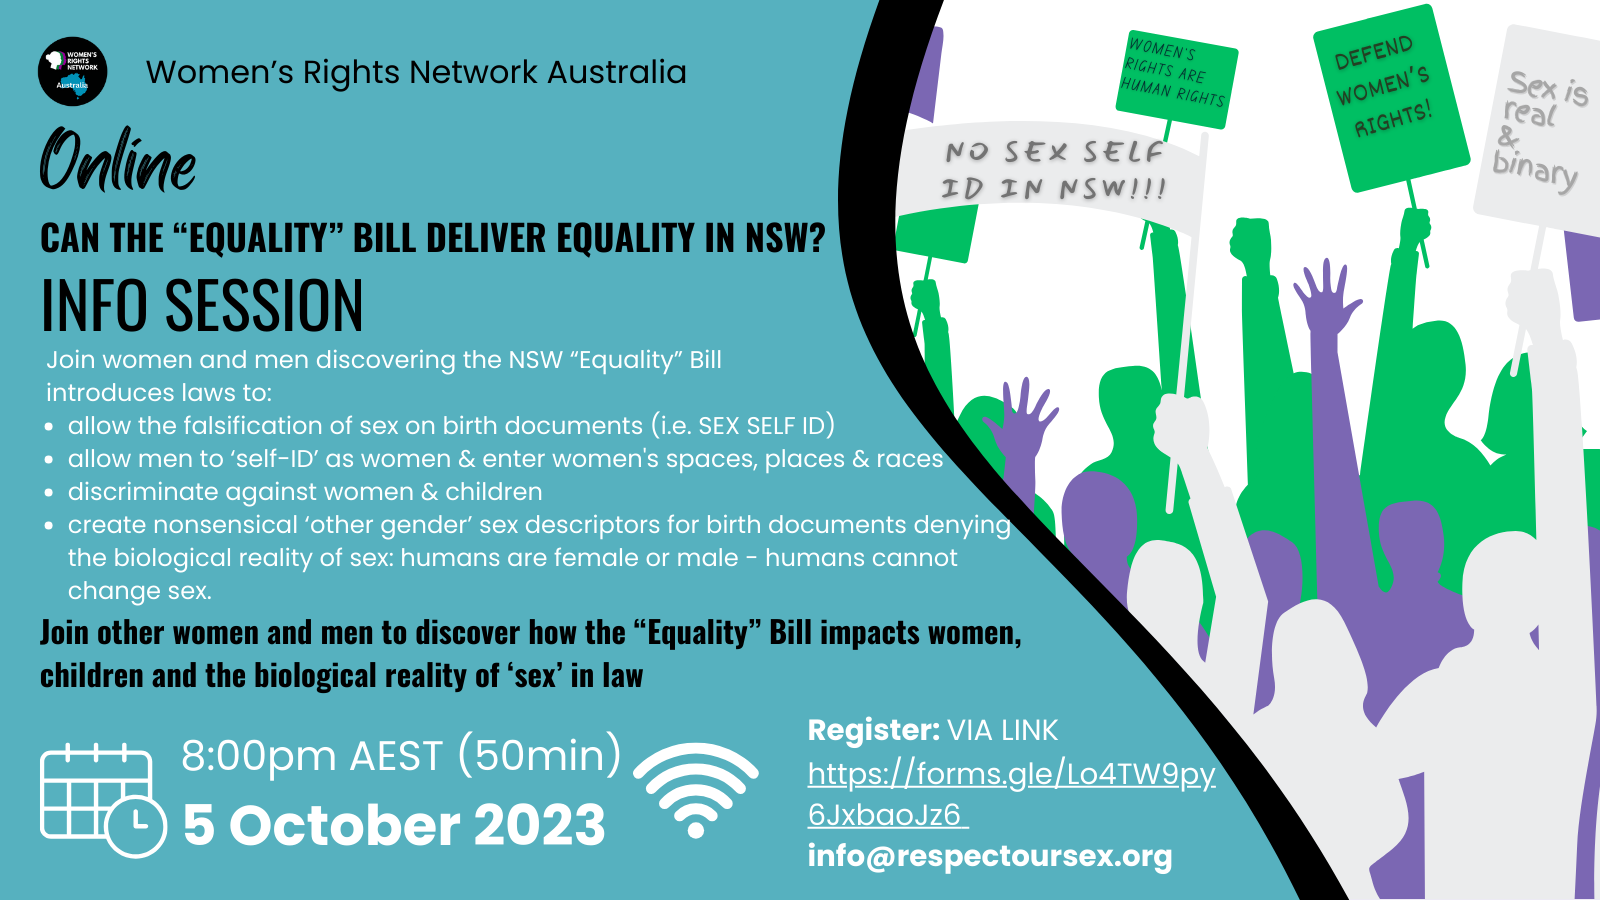 Can the Equality Bill Deliver Equality?